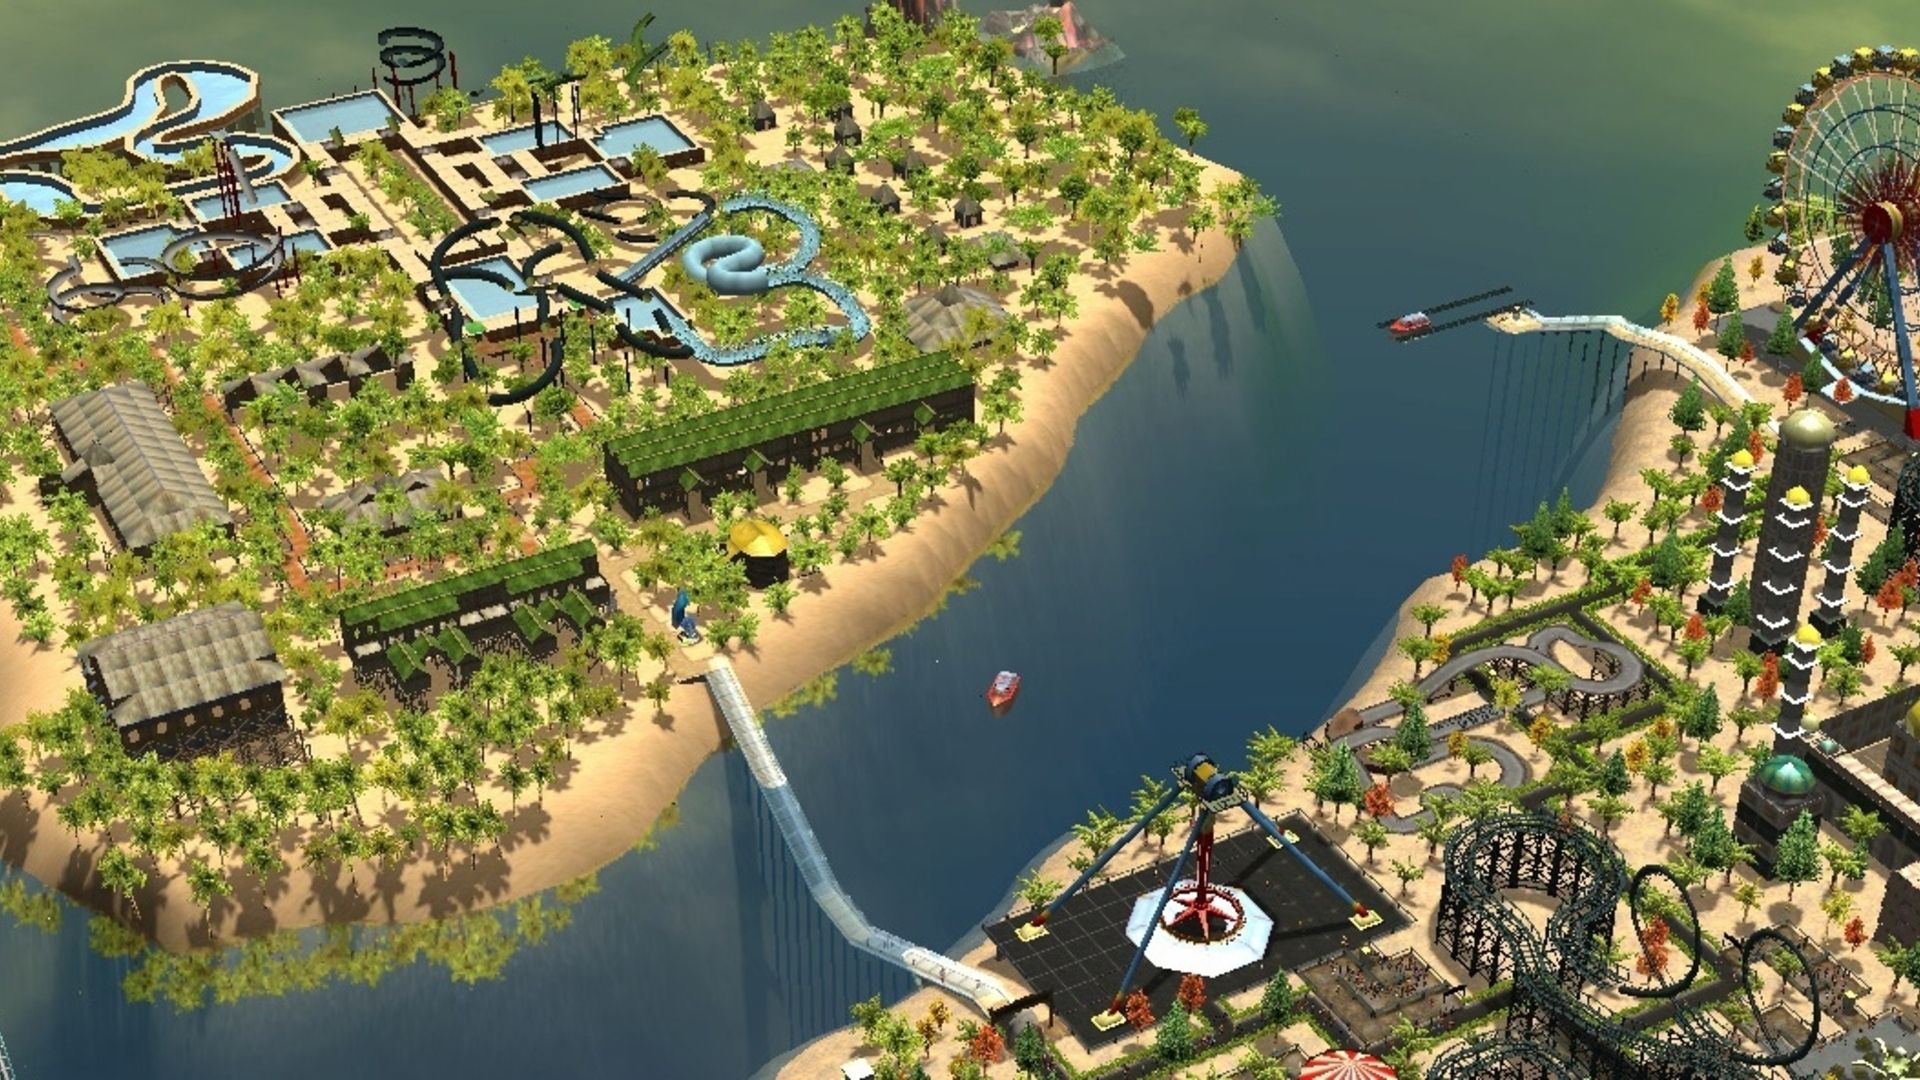 A RollerCoaster Tycoon 3: Complete Edition listing has been spotted in the Switch eShop's backend